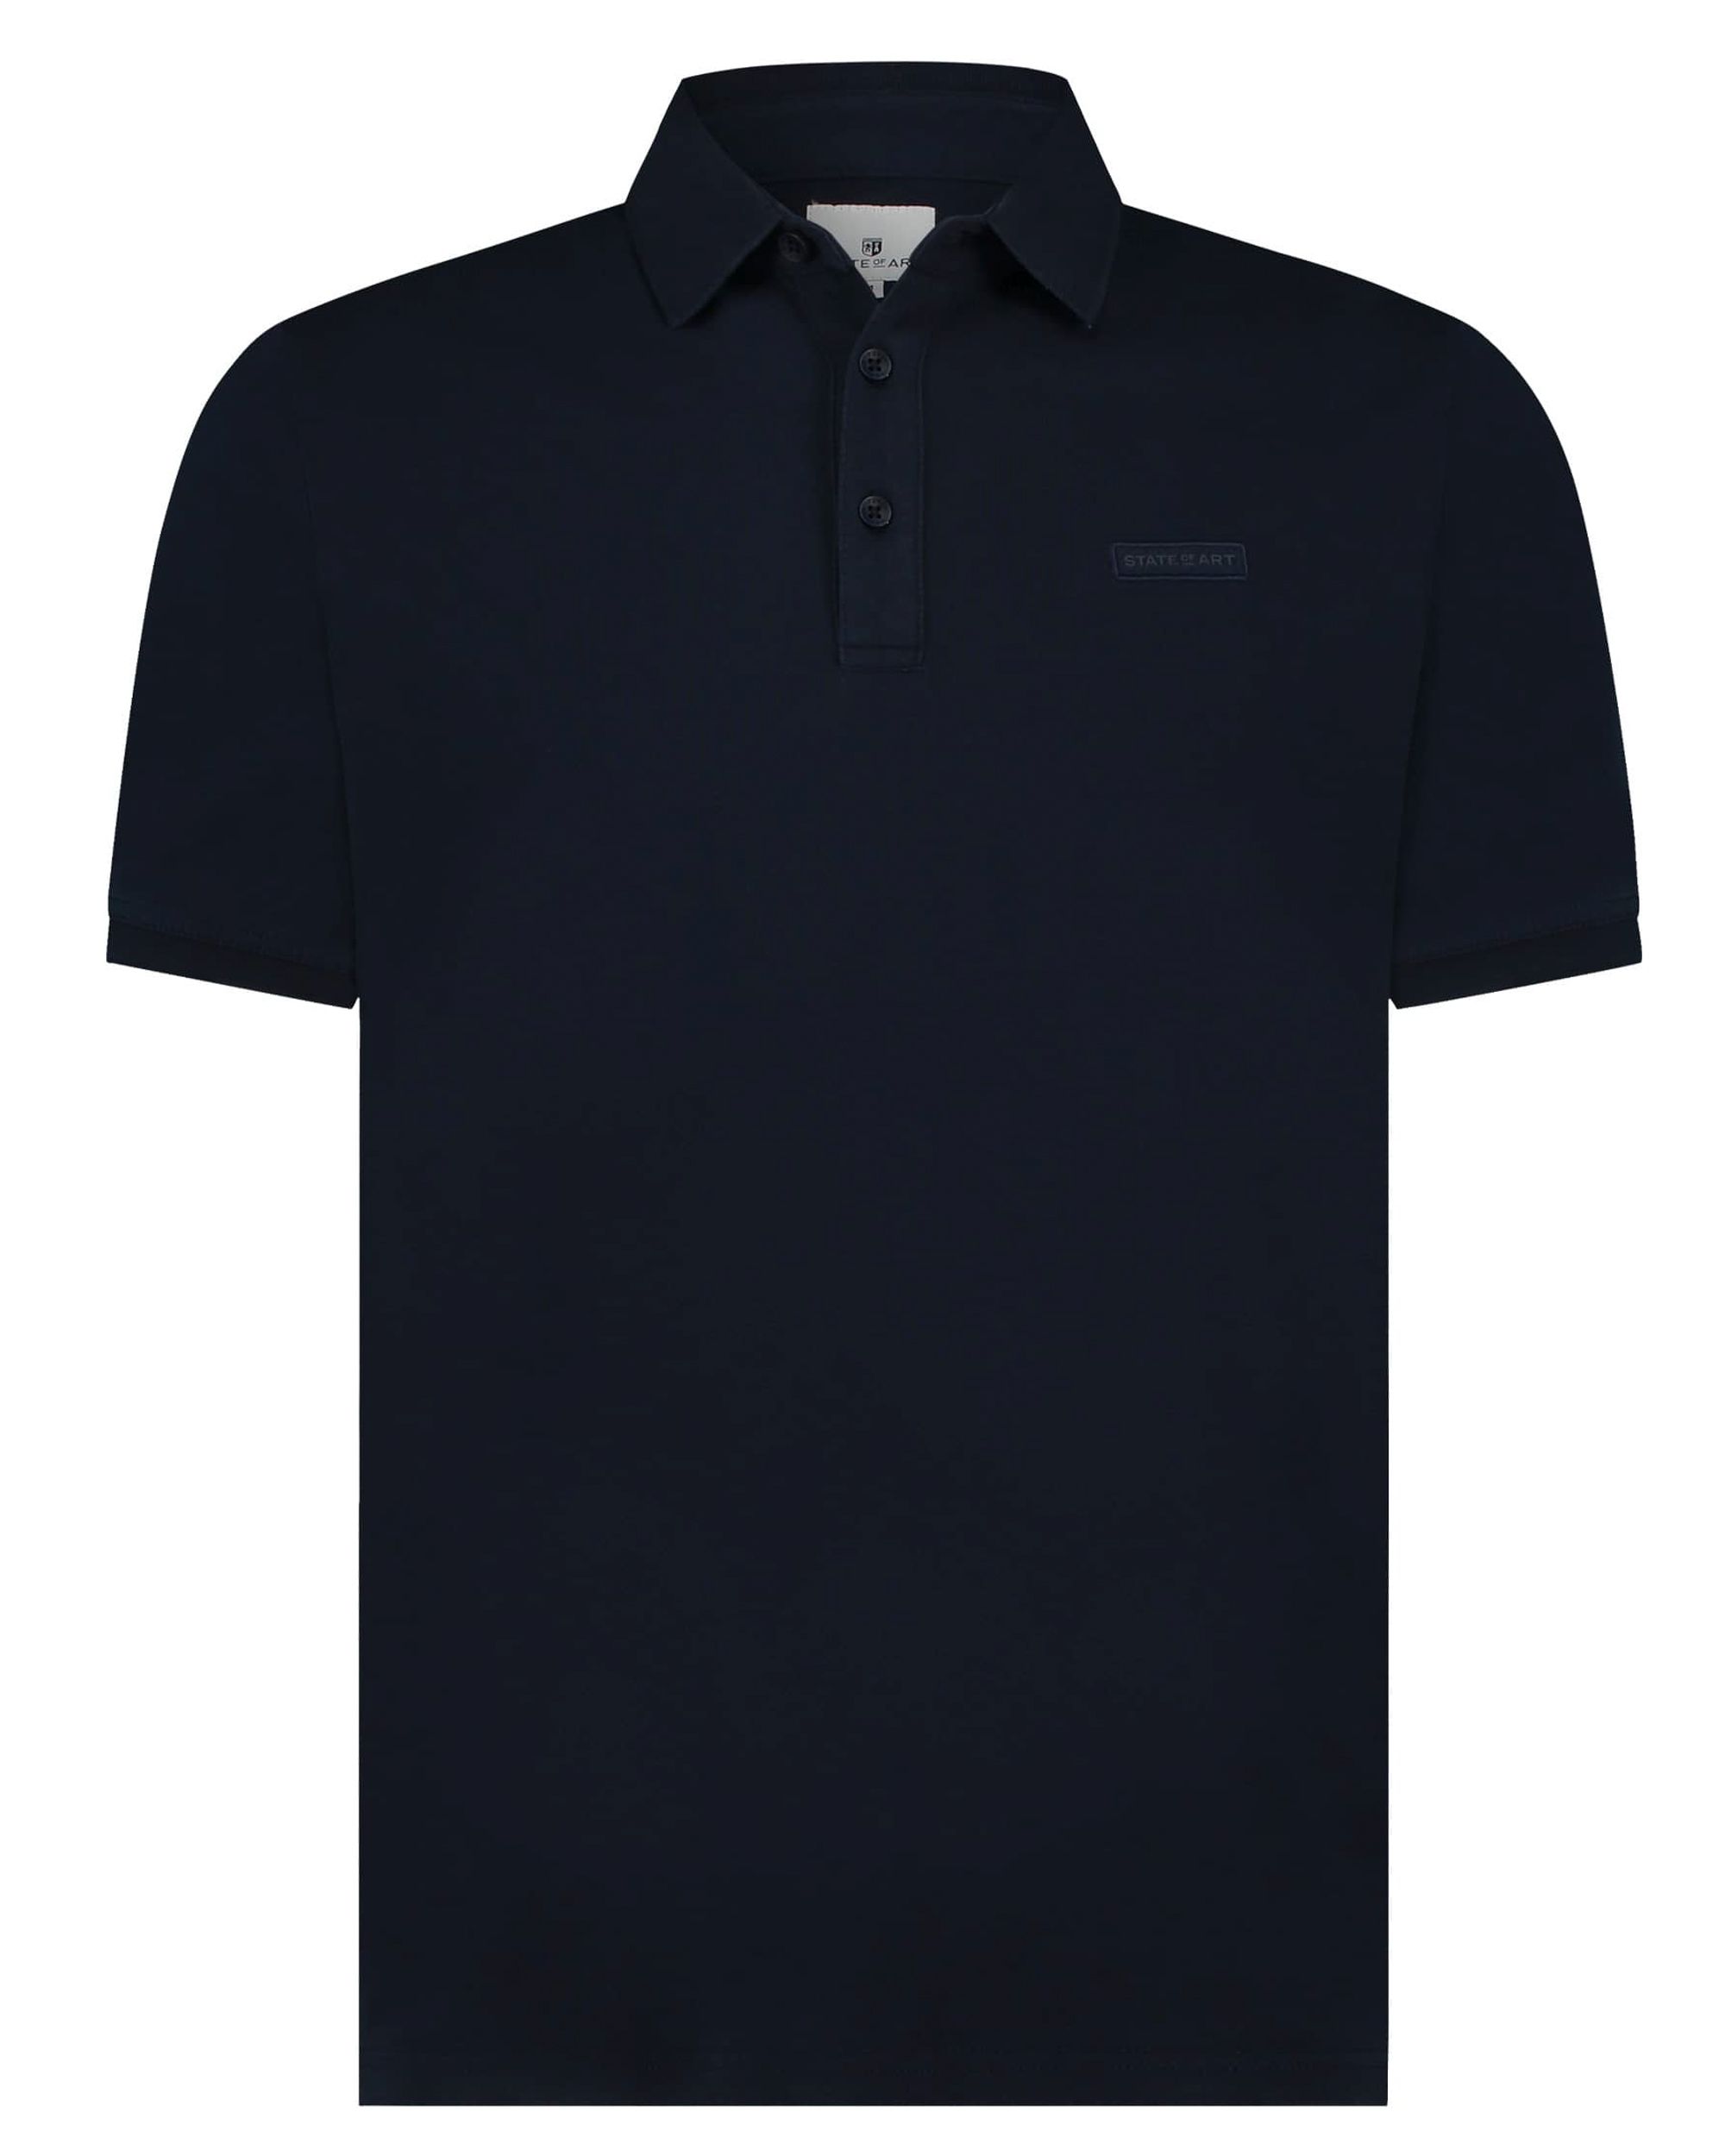 State of Art Polo KM Donker blauw 093444-001-4XL